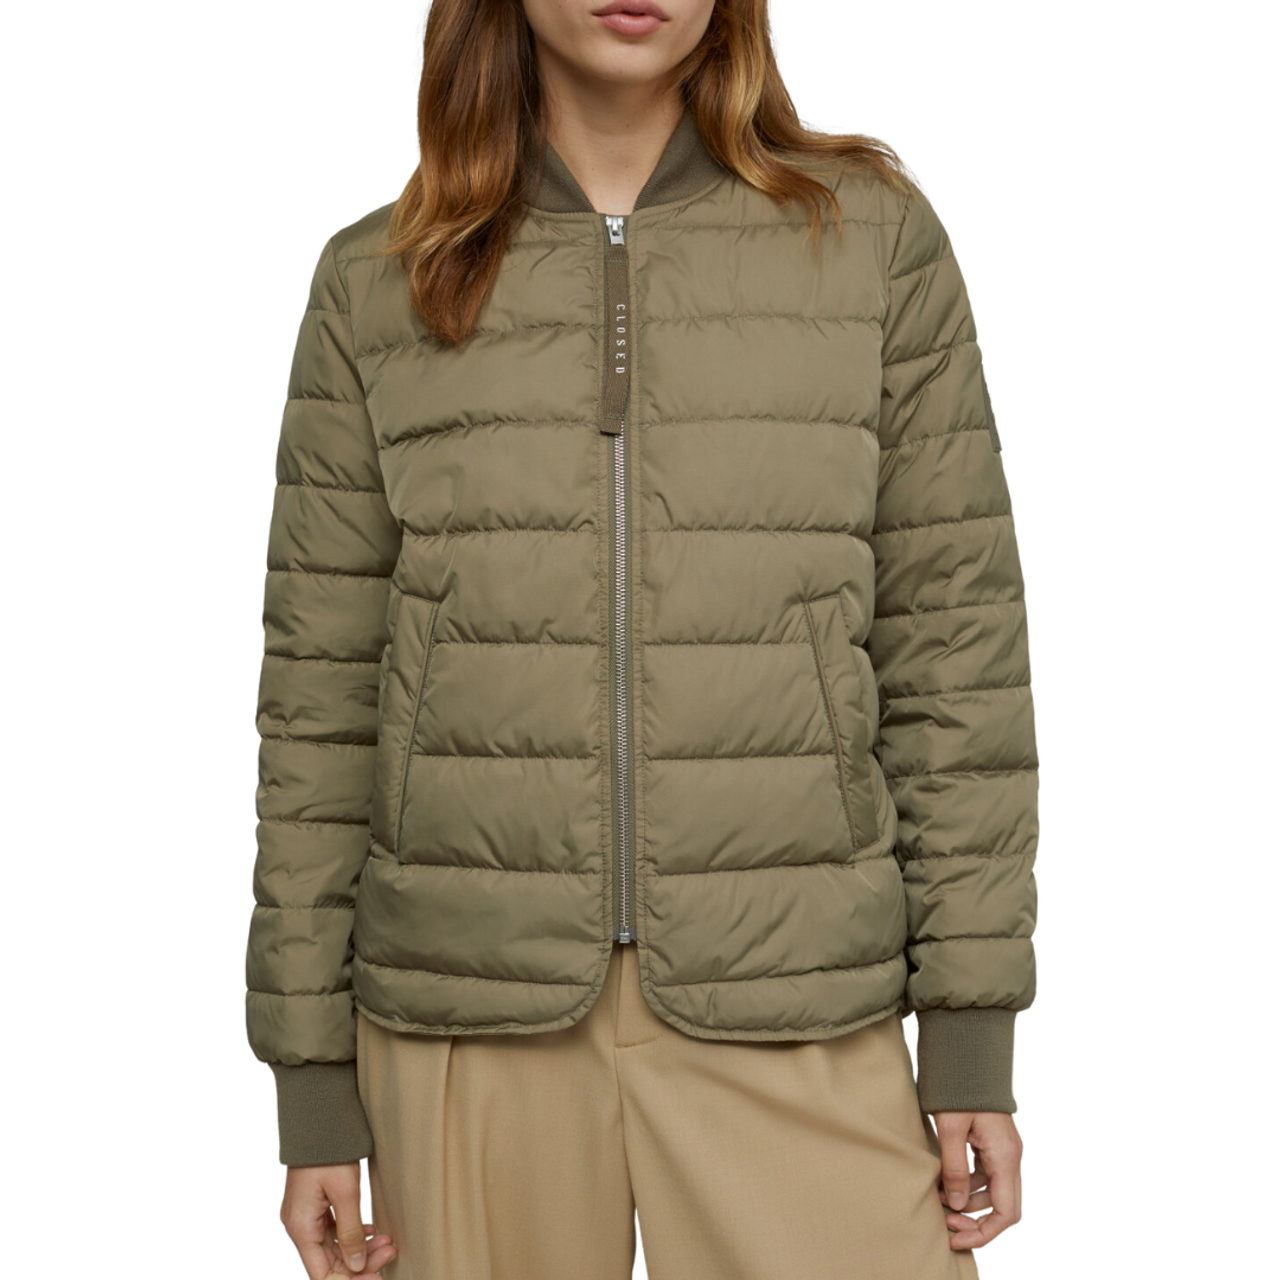 Giotto Dibondon Skab stun Echo Ultralight Quilted Jacket in Chocolate Chip (Army) - GREENENVY